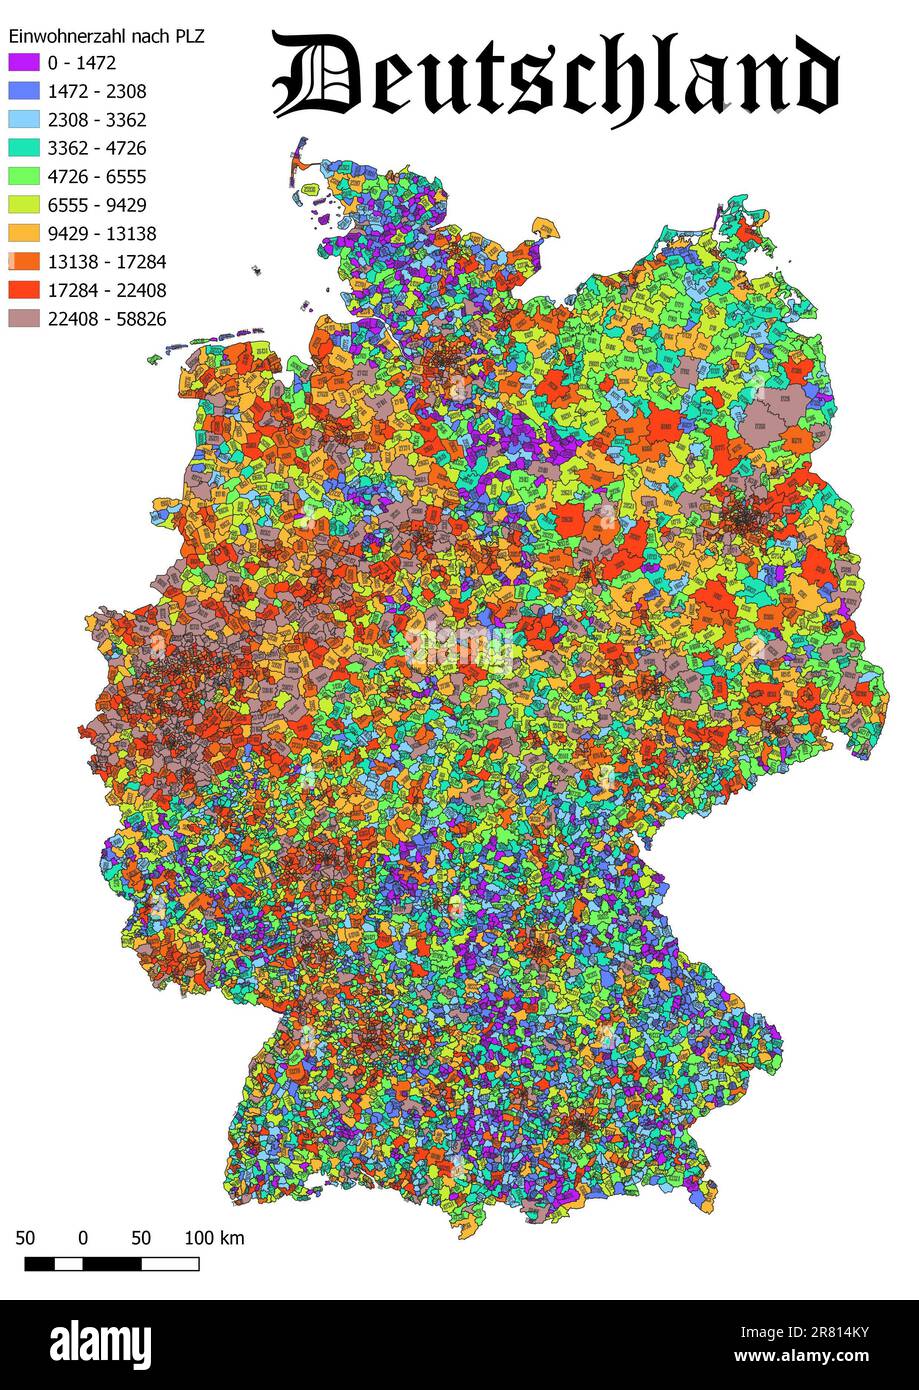 Germany population by postal code map Stock Photo